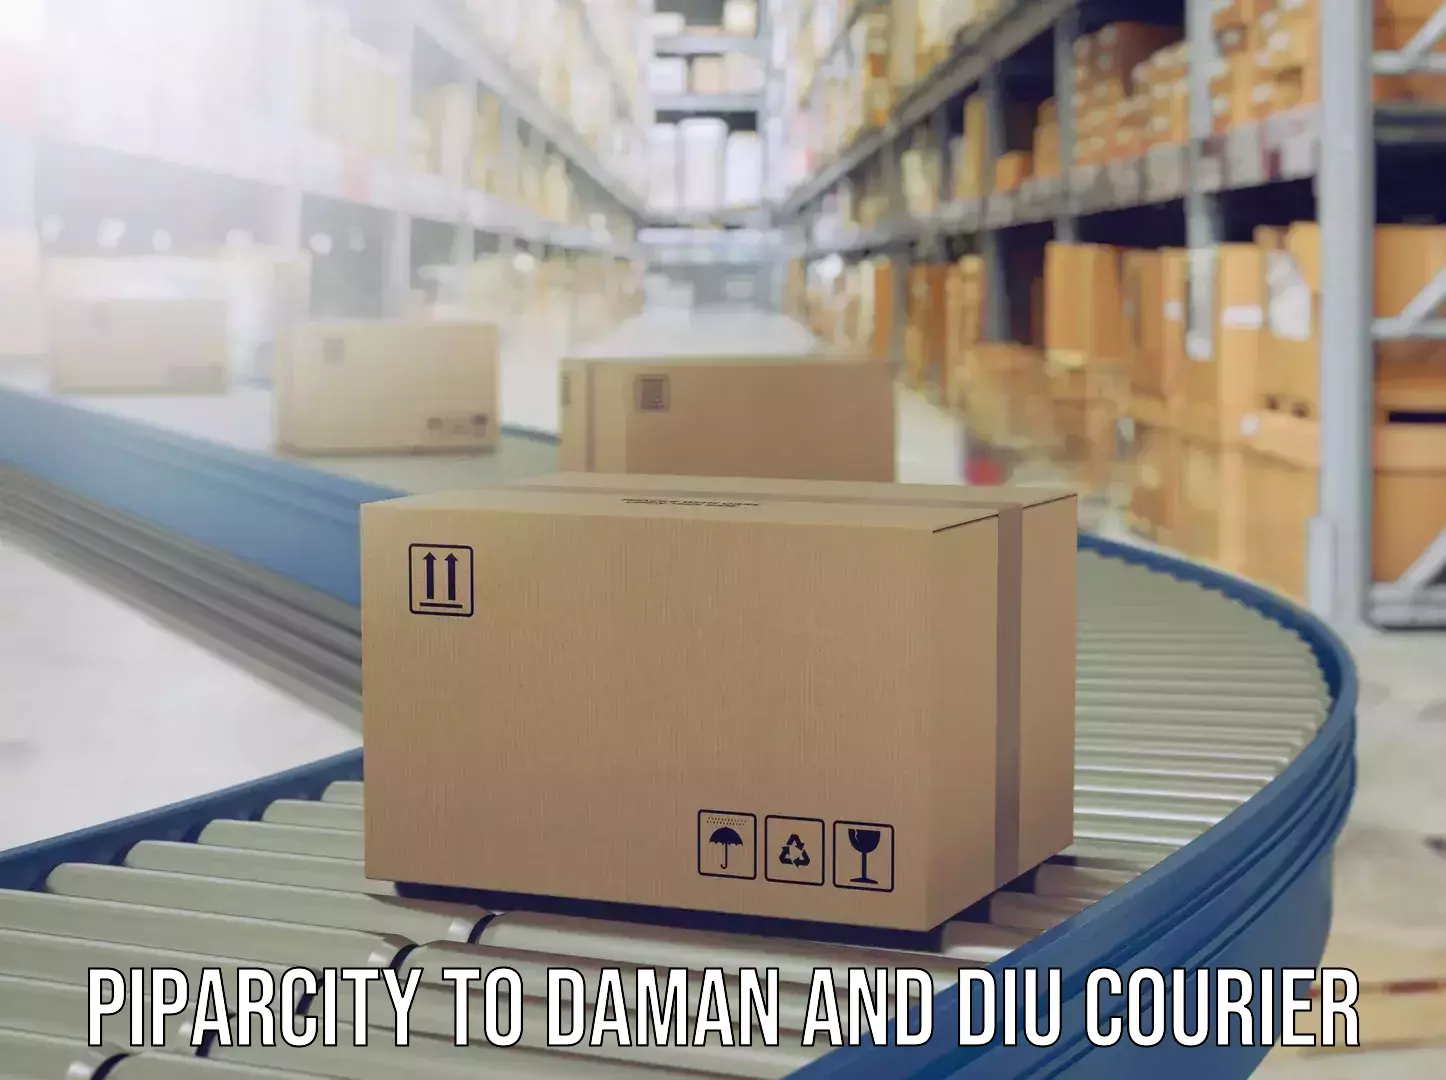 Luggage delivery system Piparcity to Diu